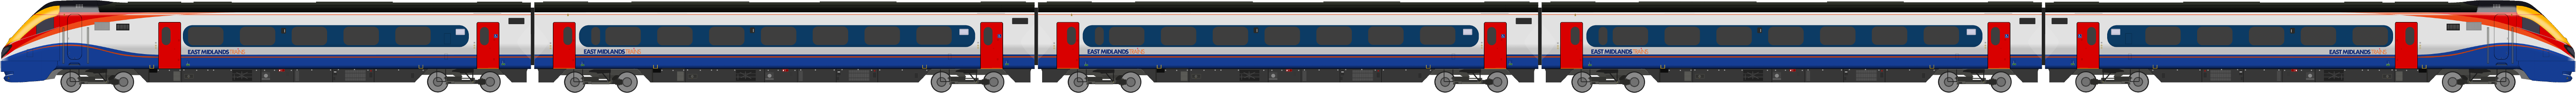 East_Midlands_Trains_Class_222_Meridian_Drawing.png